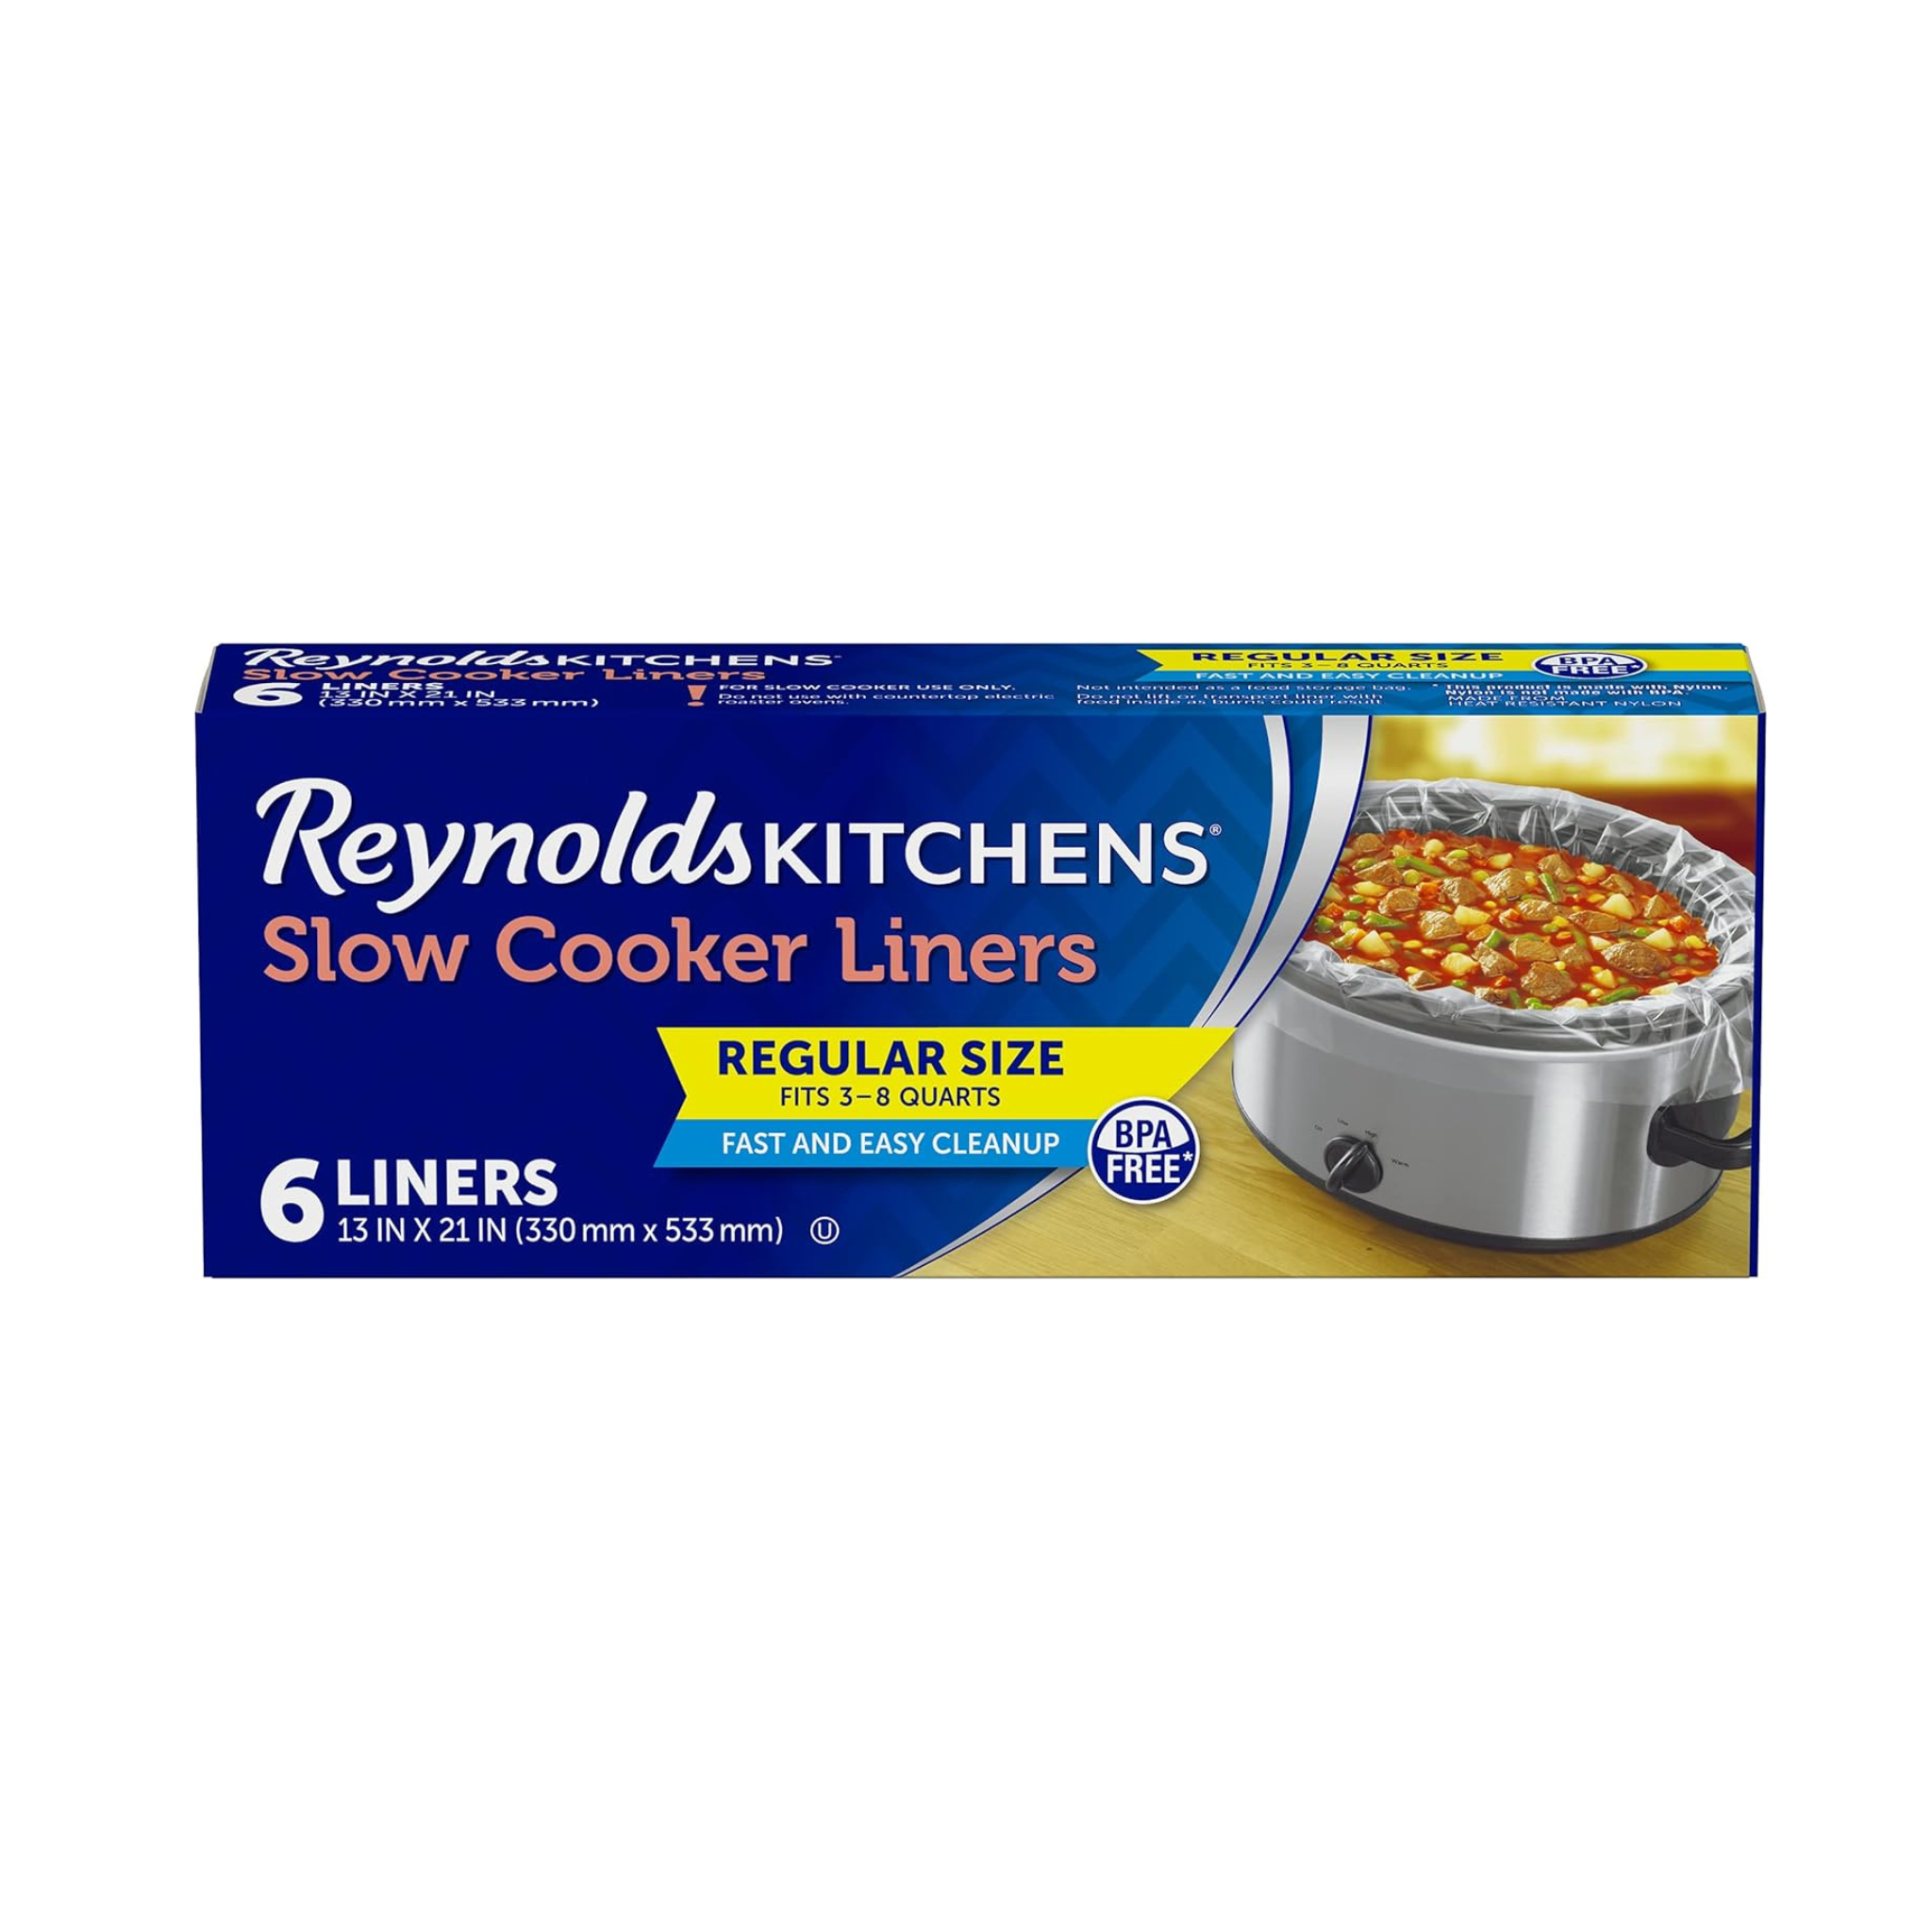 Reynolds Kitchens Slow Cooker Liners, 6 Count (Fits 3-8 Quarts)